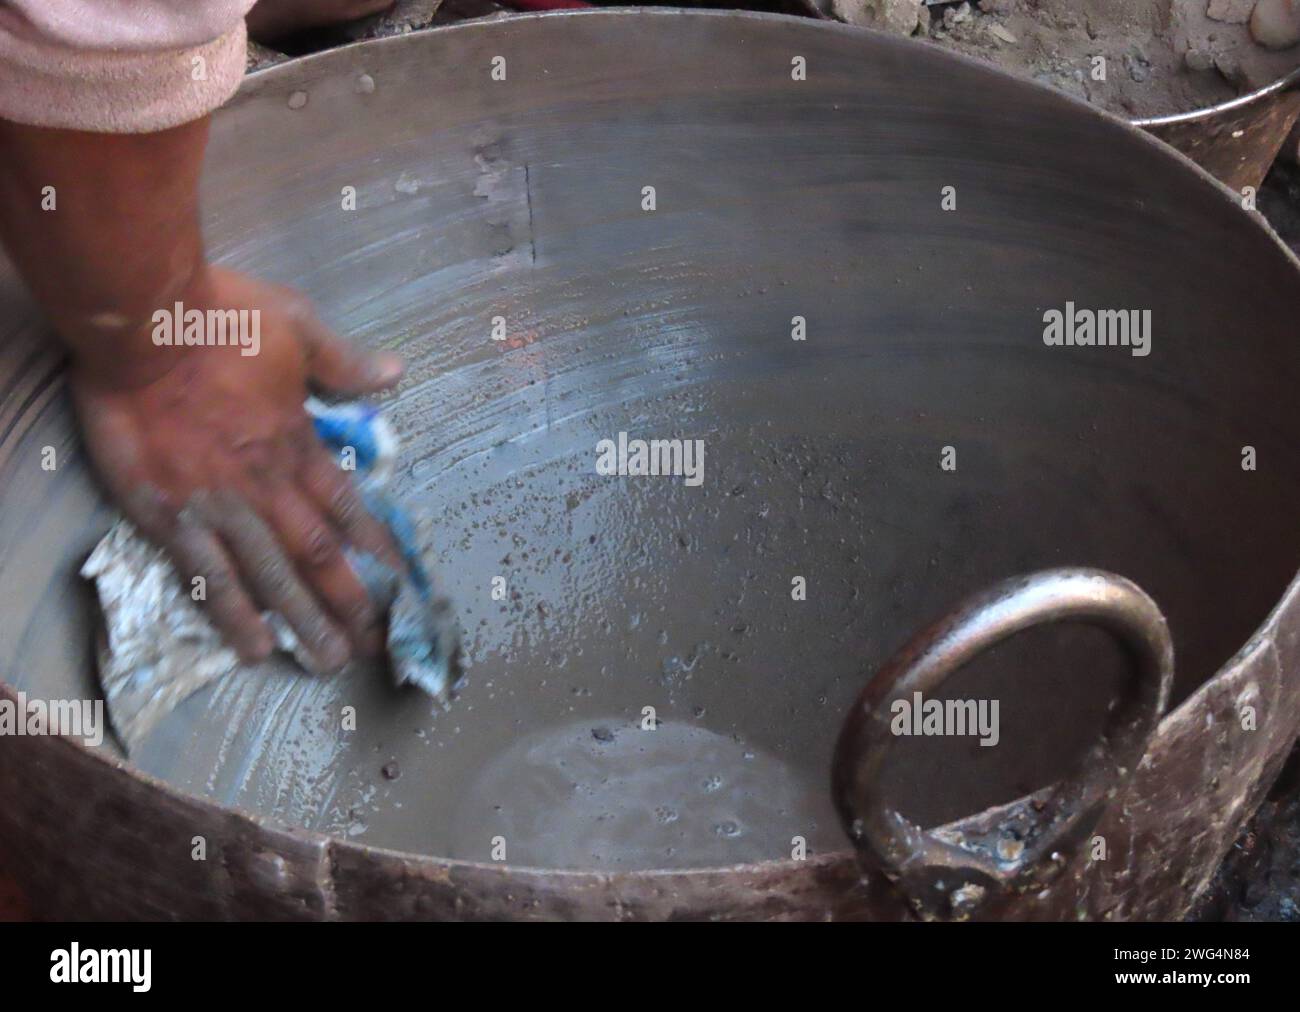 An action motion shot of a man cleaning a large cooking pot with sand and grit with a dirty cloth and water. Cooking eating out hygiene concept Stock Photo